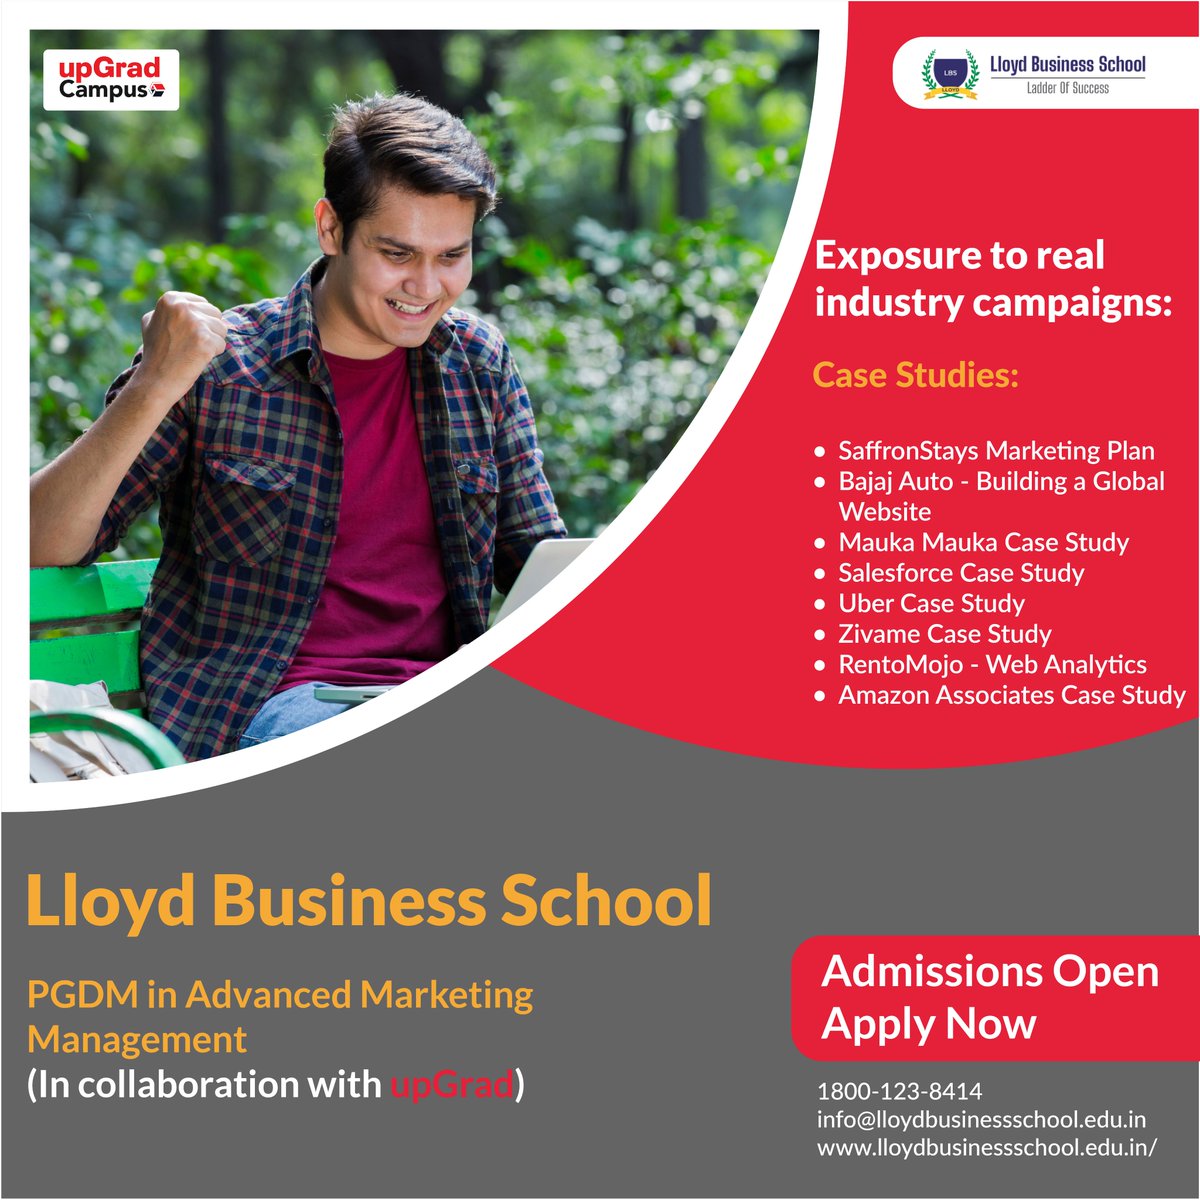 @lloydlbspgdm is proud to announce PGDM Specialisation in Advanced Marketing Management - a 2 year course in association with upGrad. Enroll in course now for a career in the world of Marketing, Digital Marketing, Advertising and Promotion, SEO Specialist etc.#SEOTraining #upGrad